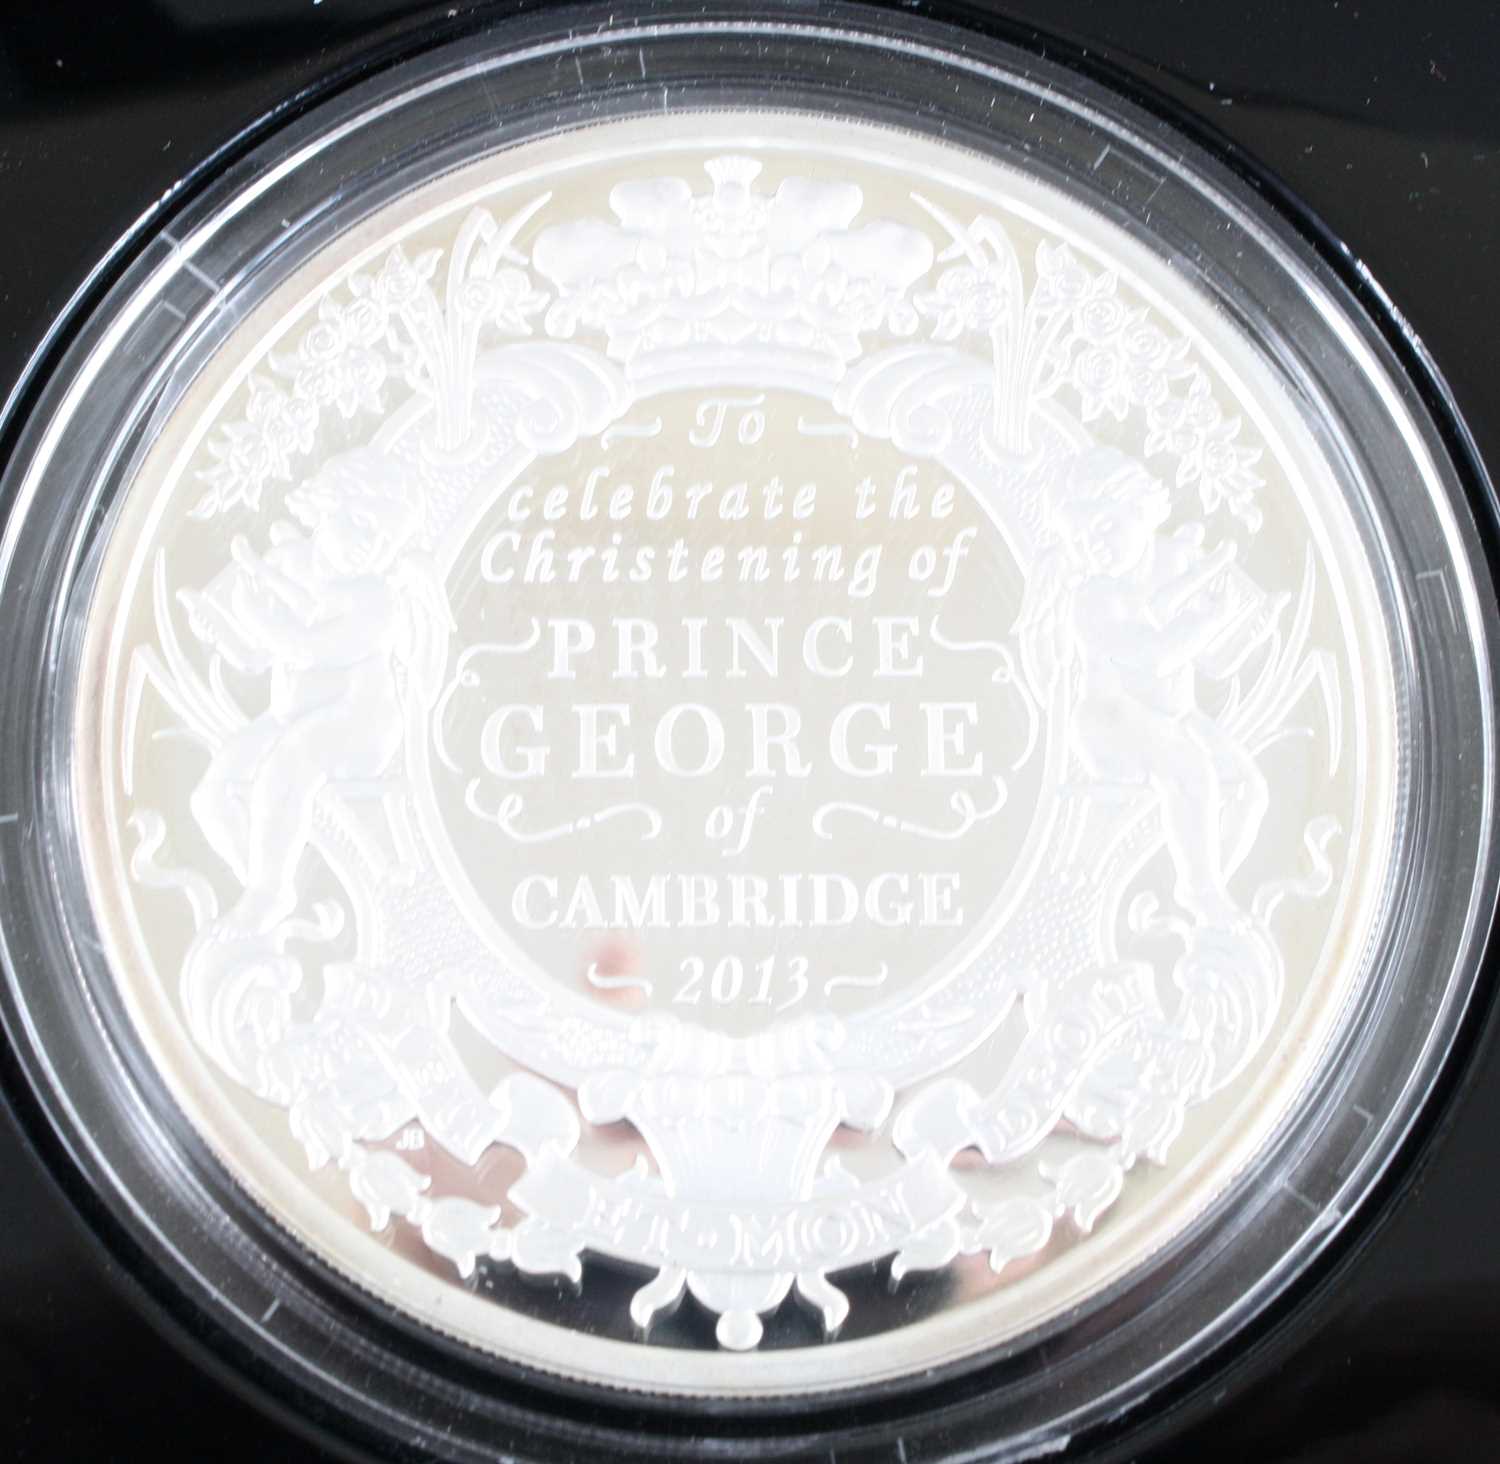 United Kingdom, The Royal Mint, The Christening of H.R.H. Prince George of Cambridge, 2013 Five- - Image 2 of 2